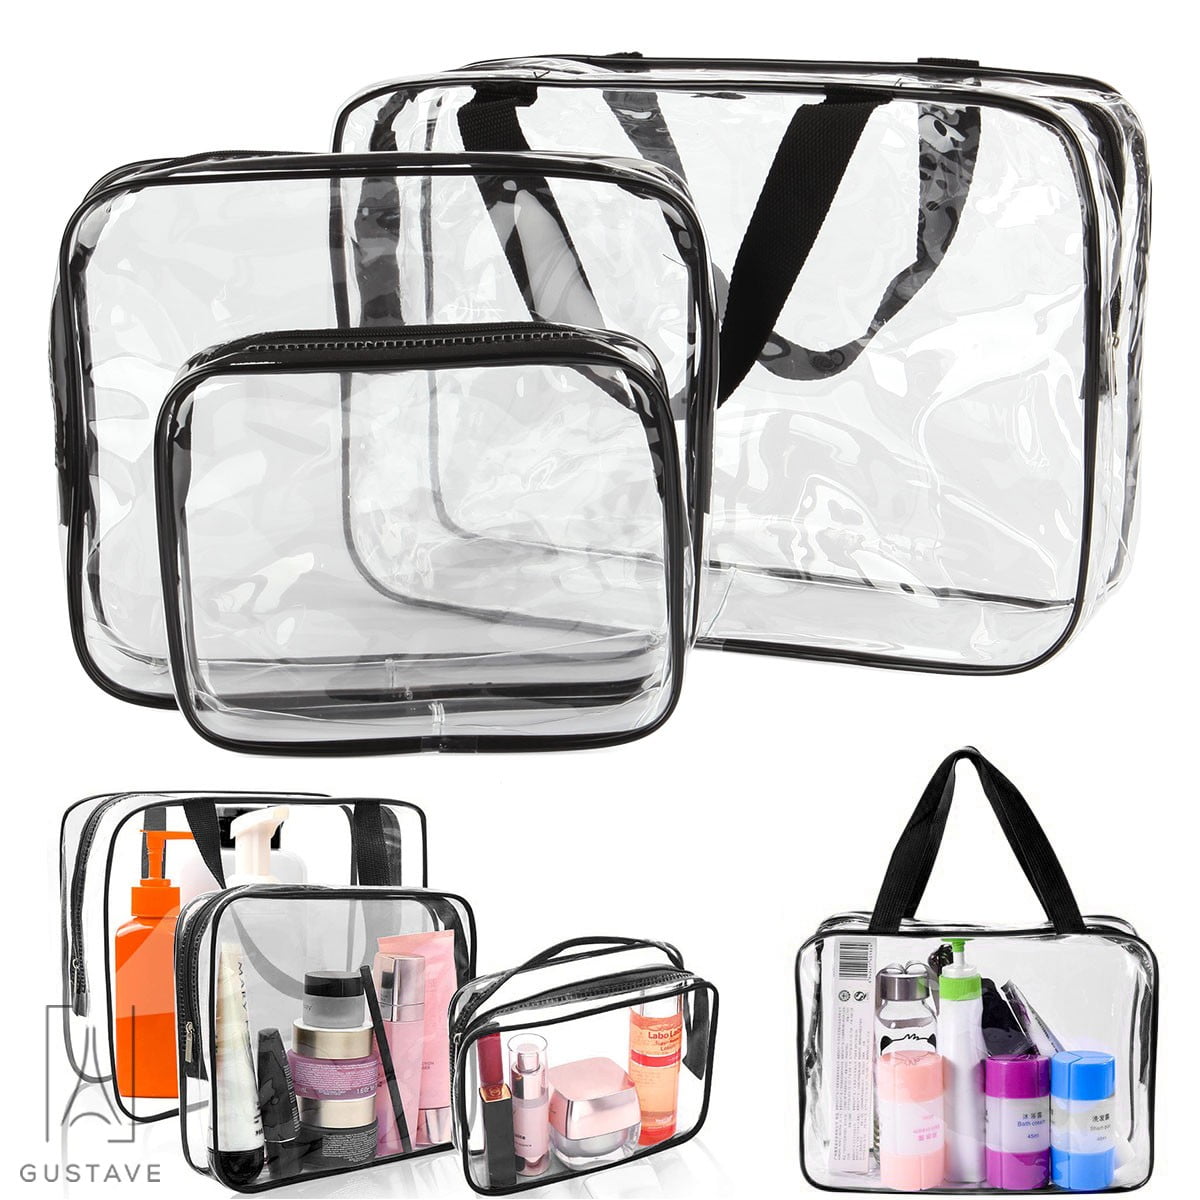  makeup bag 3Pcs,Professional Cosmetic Make up Bags Travel Case  Organizer,Accessories Case, Portable Toiletry Bags Womens Clear Tools  ,Organizer for Waterproof and Shower Accessories (Checkered) : Beauty &  Personal Care